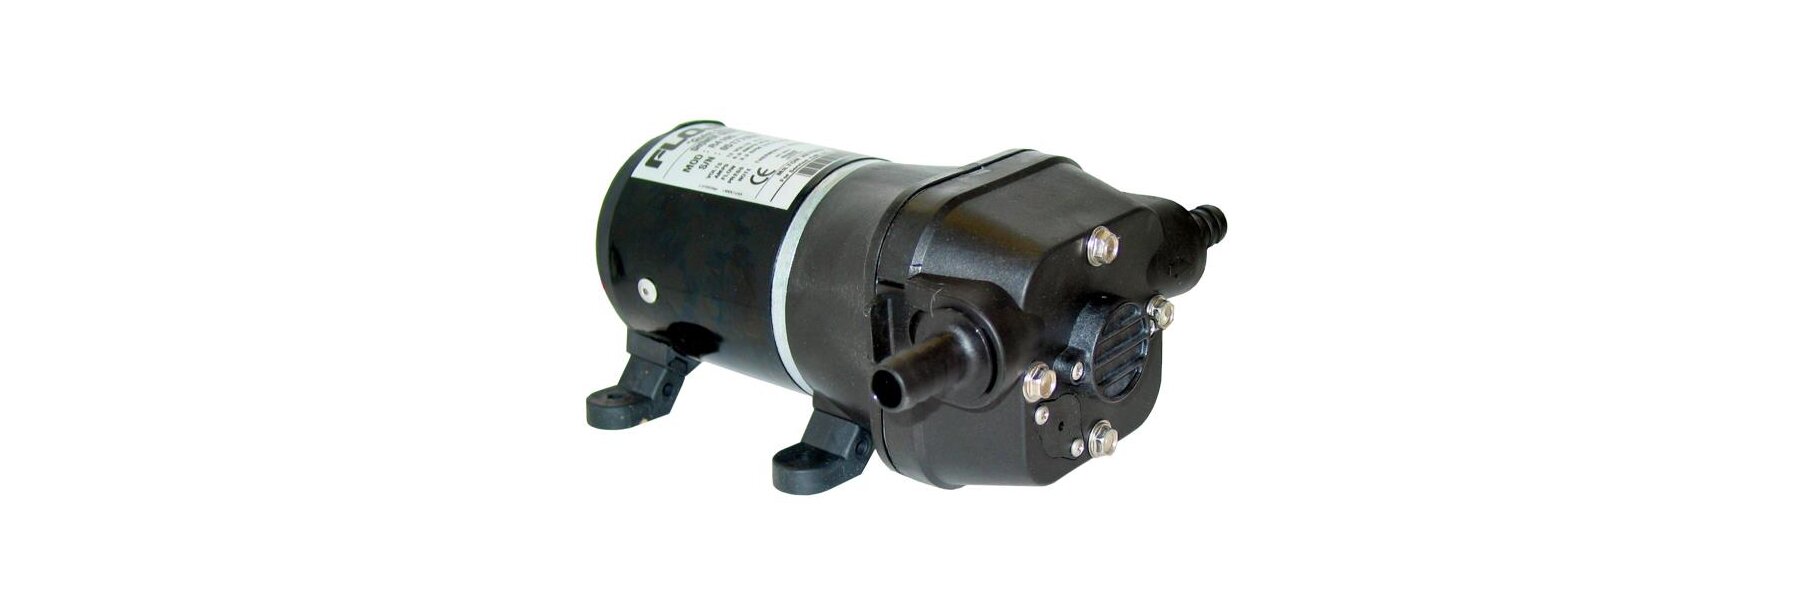 Flojet: General purpose pumps and spare parts - buy online